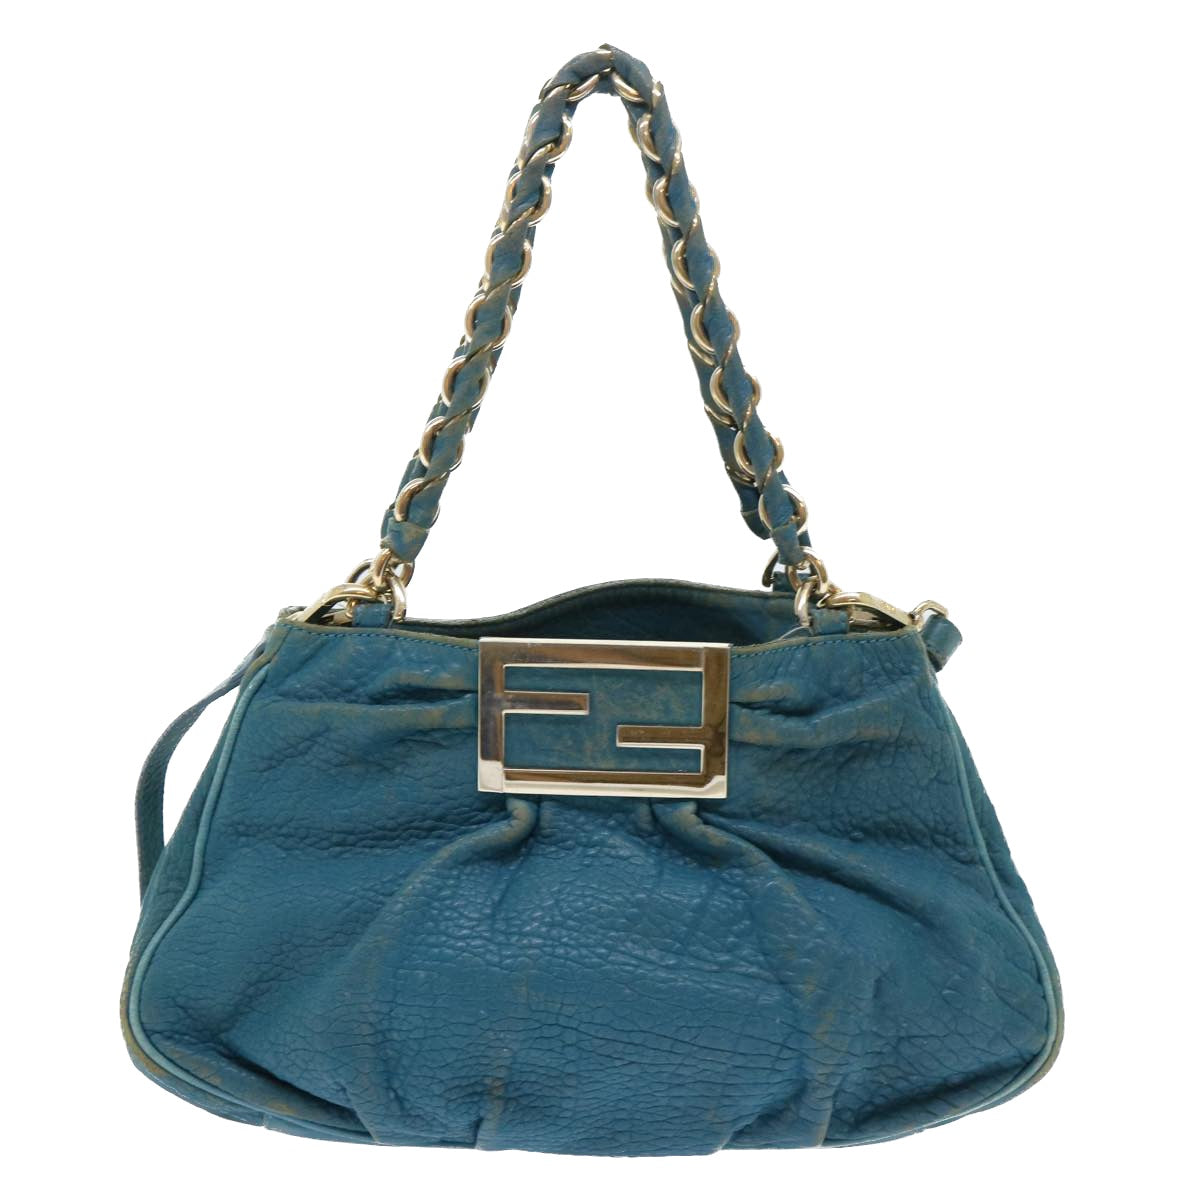 FENDI Chain Shoulder Bag Leather 2way Turquoise Blue Auth 52739 - 0